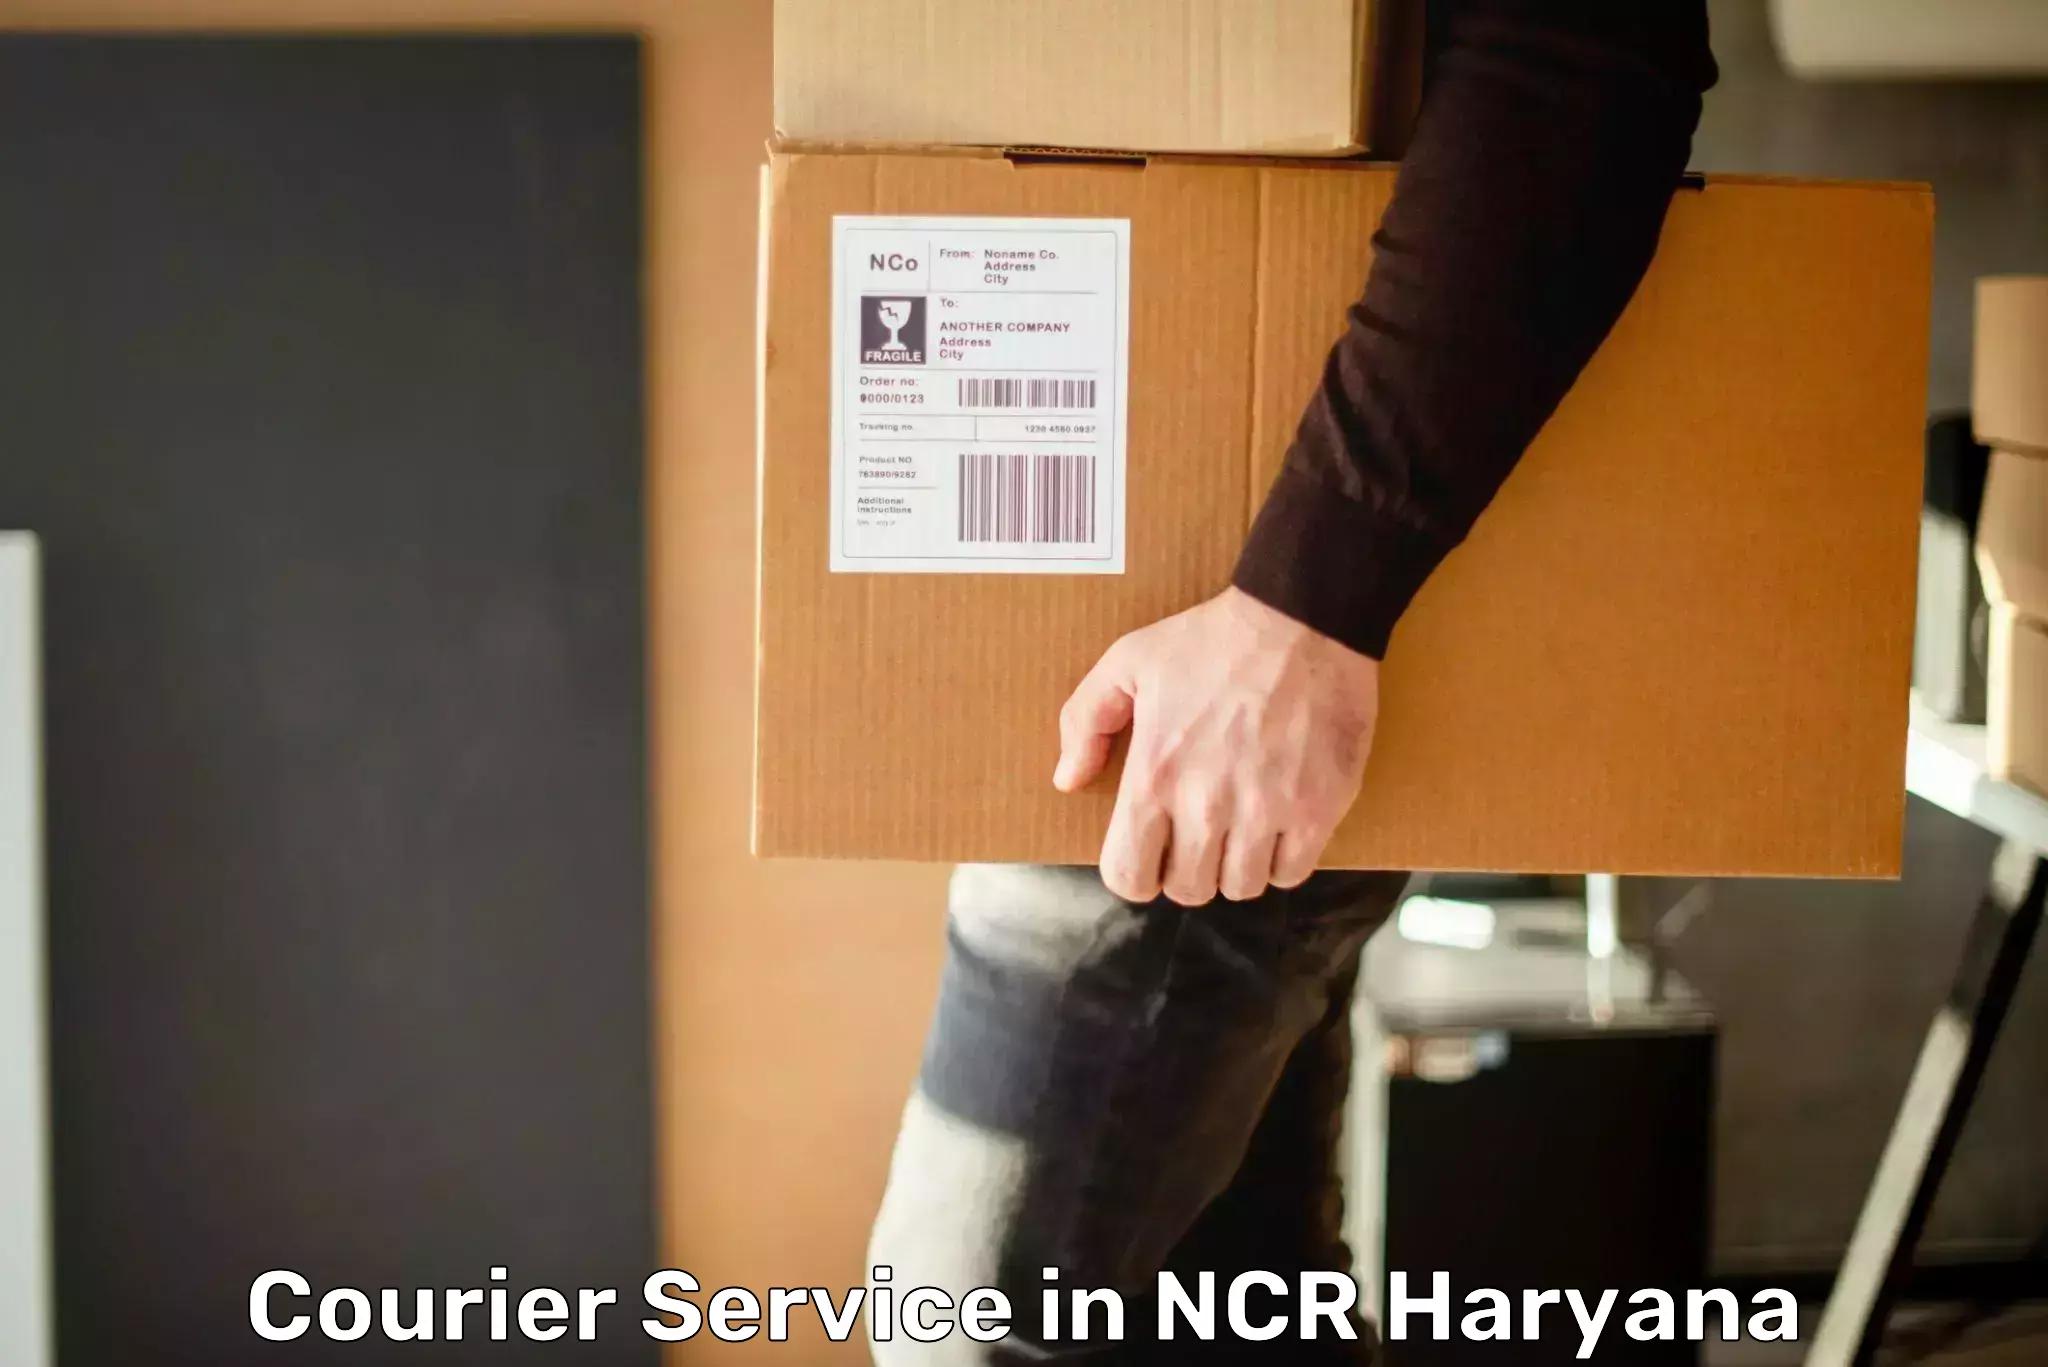 Full-service courier options in NCR Haryana